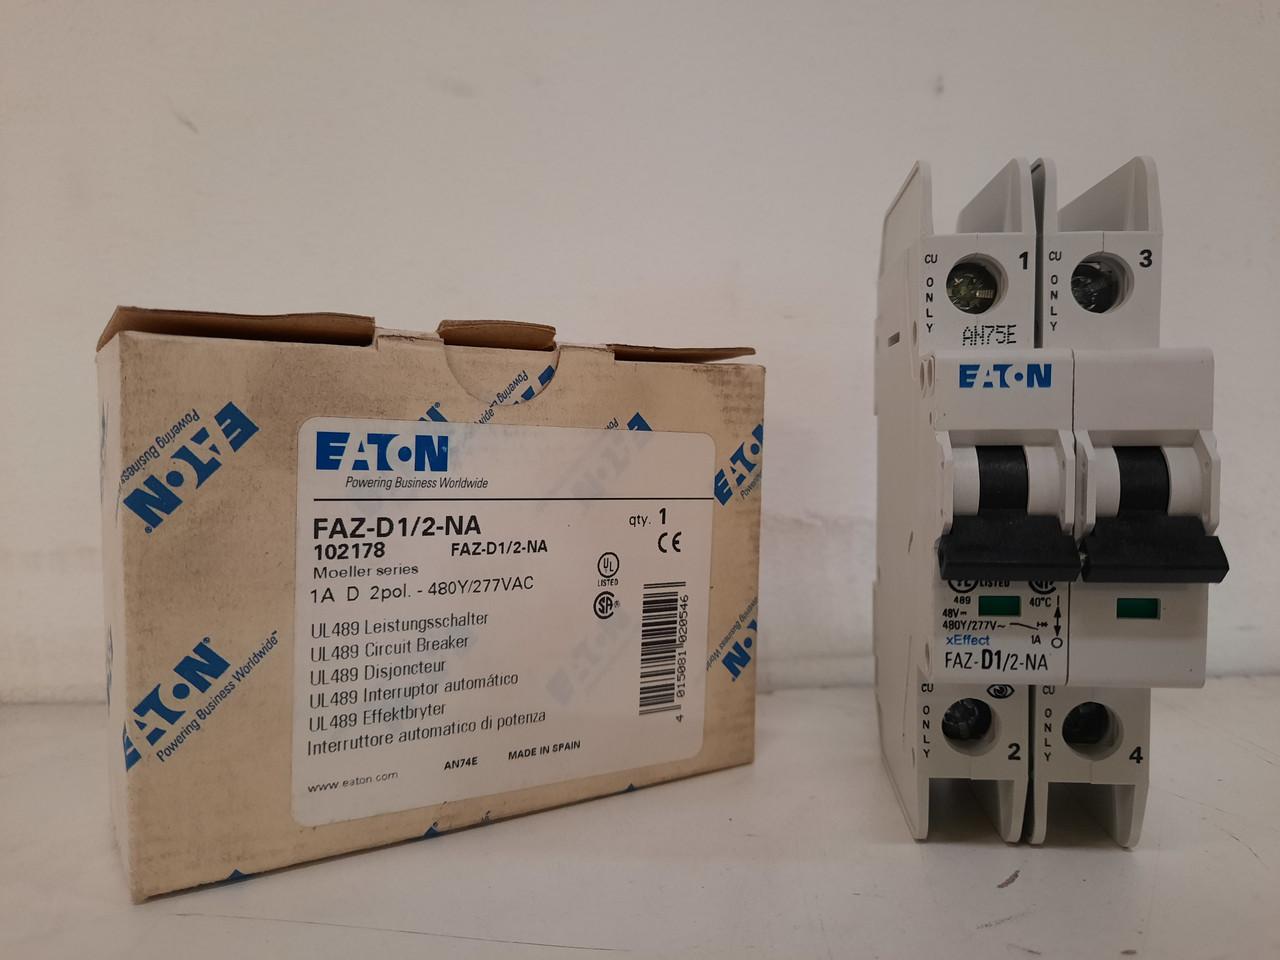 Eaton FAZ-D1/2-NA 277/480 VAC 50/60 Hz, 1 A, 2-Pole, 10/14 kA, 10 to 20 x Rated Current, Screw Terminal, DIN Rail Mount, Standard Packaging, D-Curve, Current Limiting, Thermal Magnetic